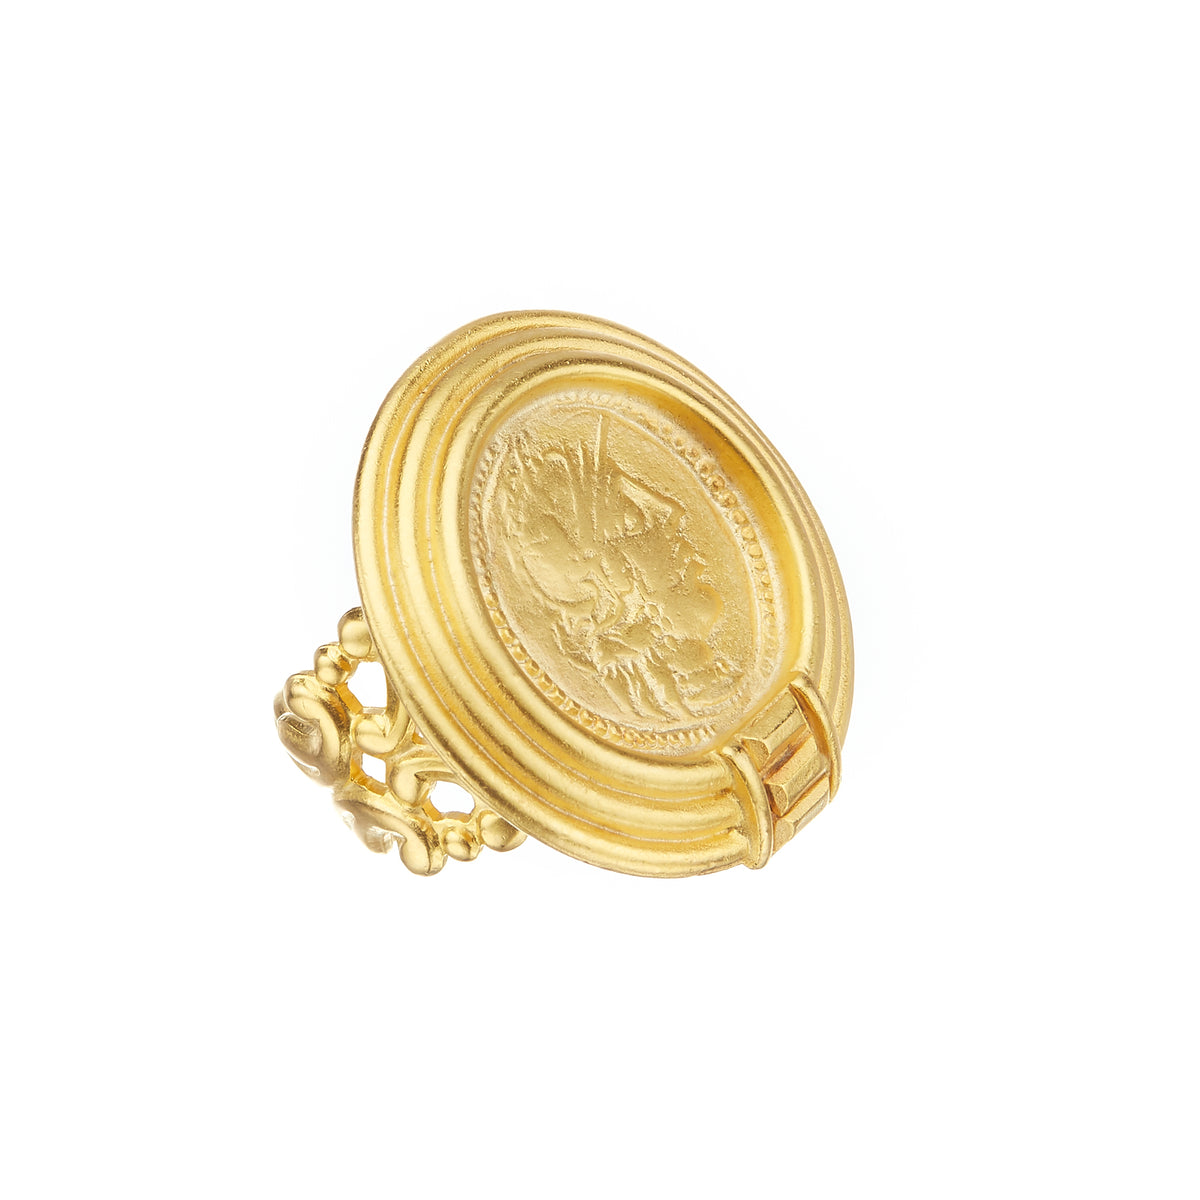 Anand Jewellers - #24kt #Beautiful #Coin #Ring Wt:8.17grams (0.70tola)  (11aana) | Facebook